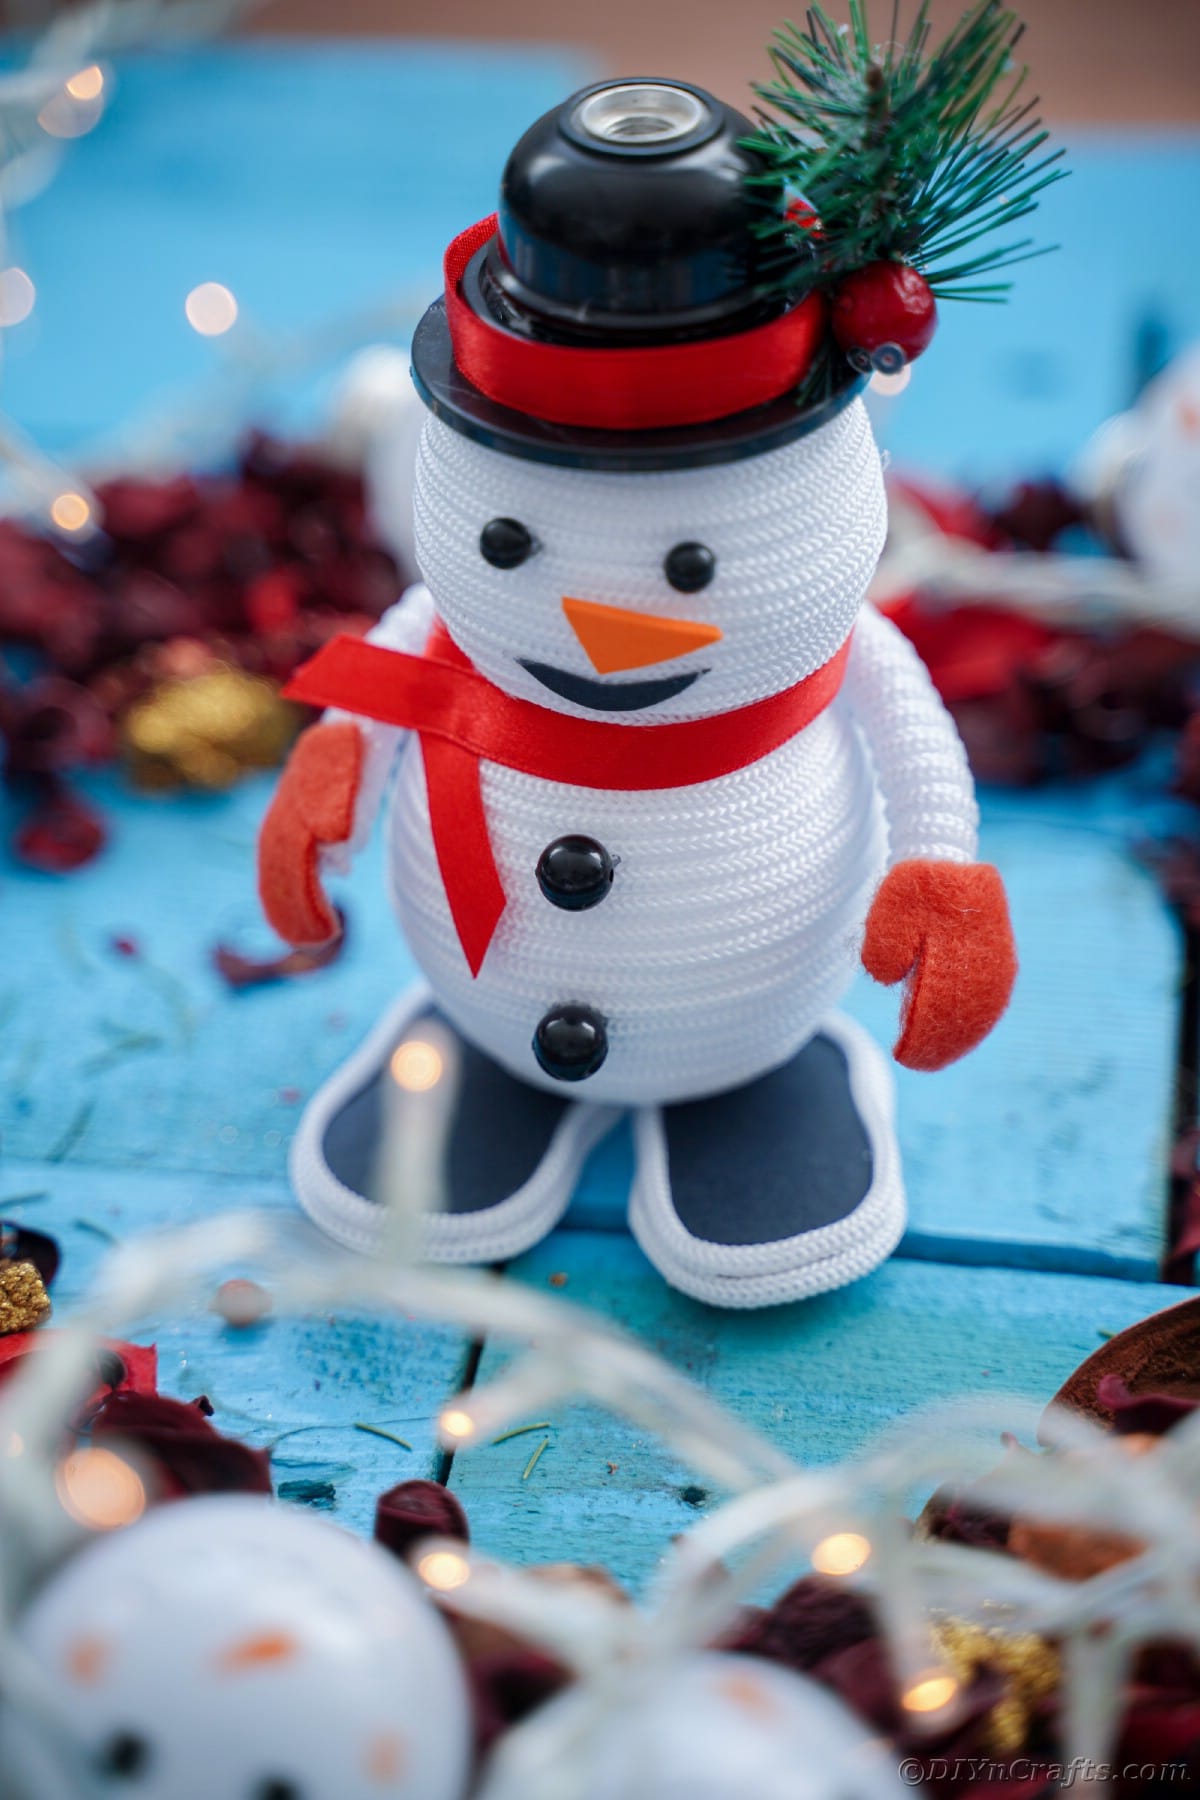 mini snowman decoration on blue table with pinecones